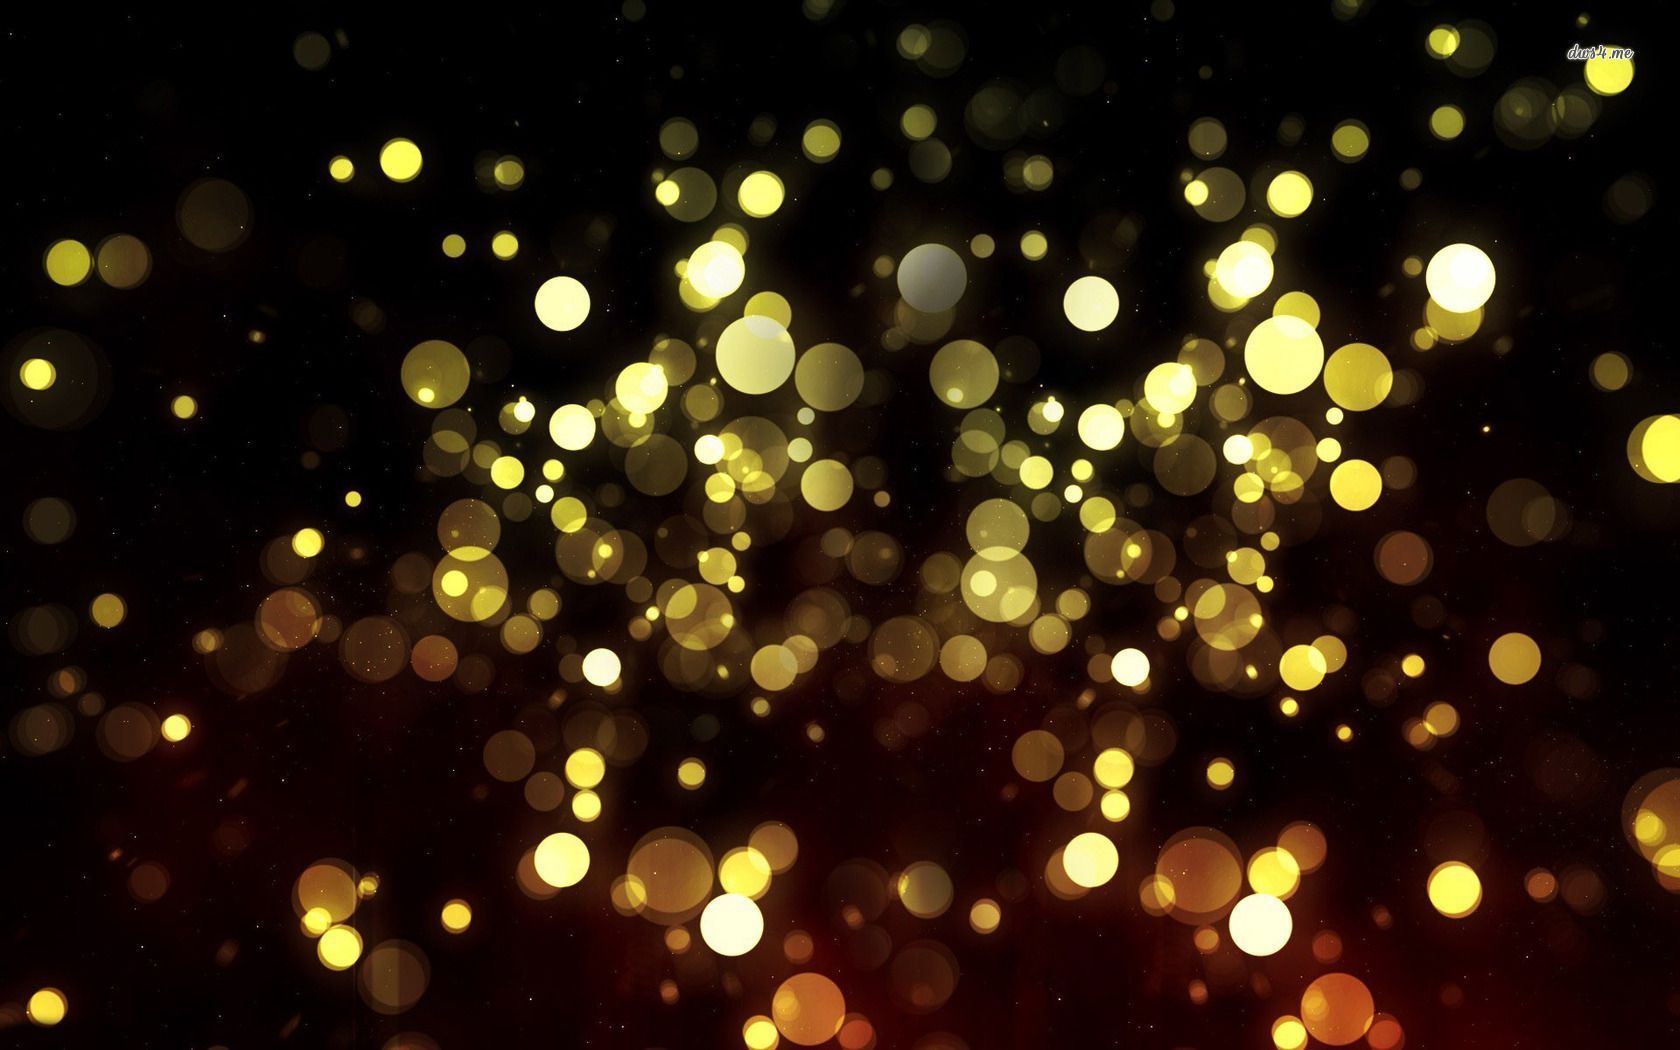 Light Bubbles wallpaper - Abstract wallpapers